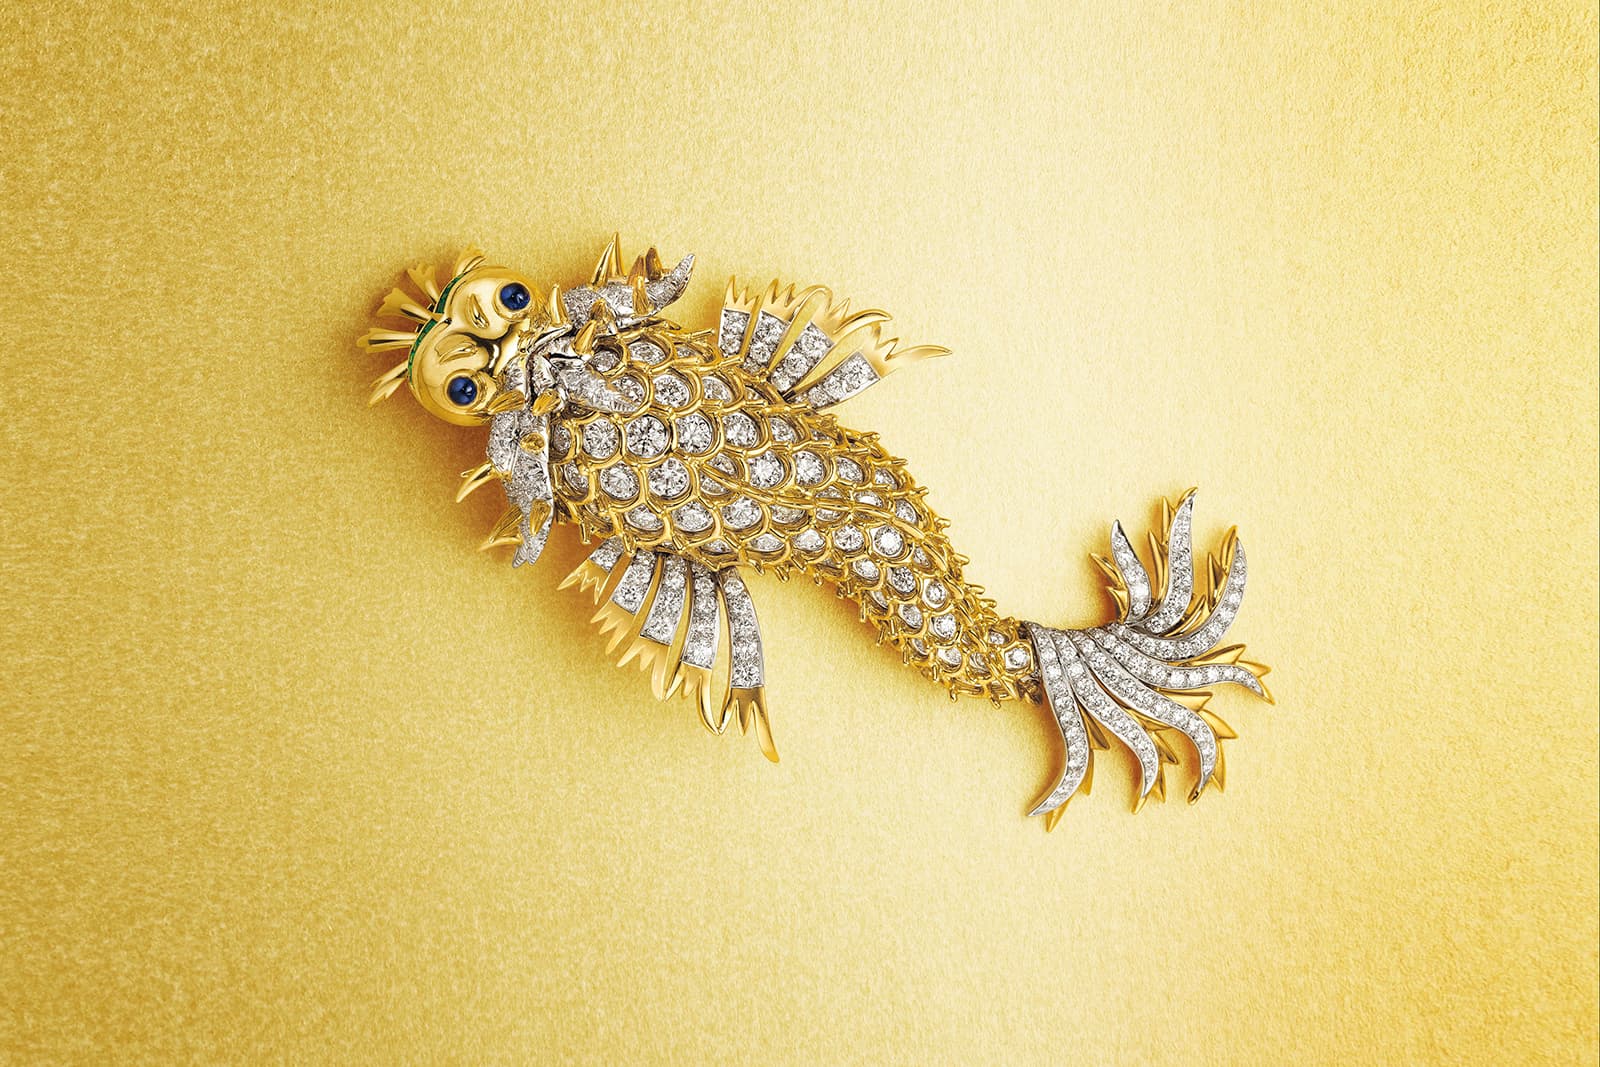 A charming ‘Dolphin’ brooch with diamonds, sapphires and emeralds by Jean Schlumberger